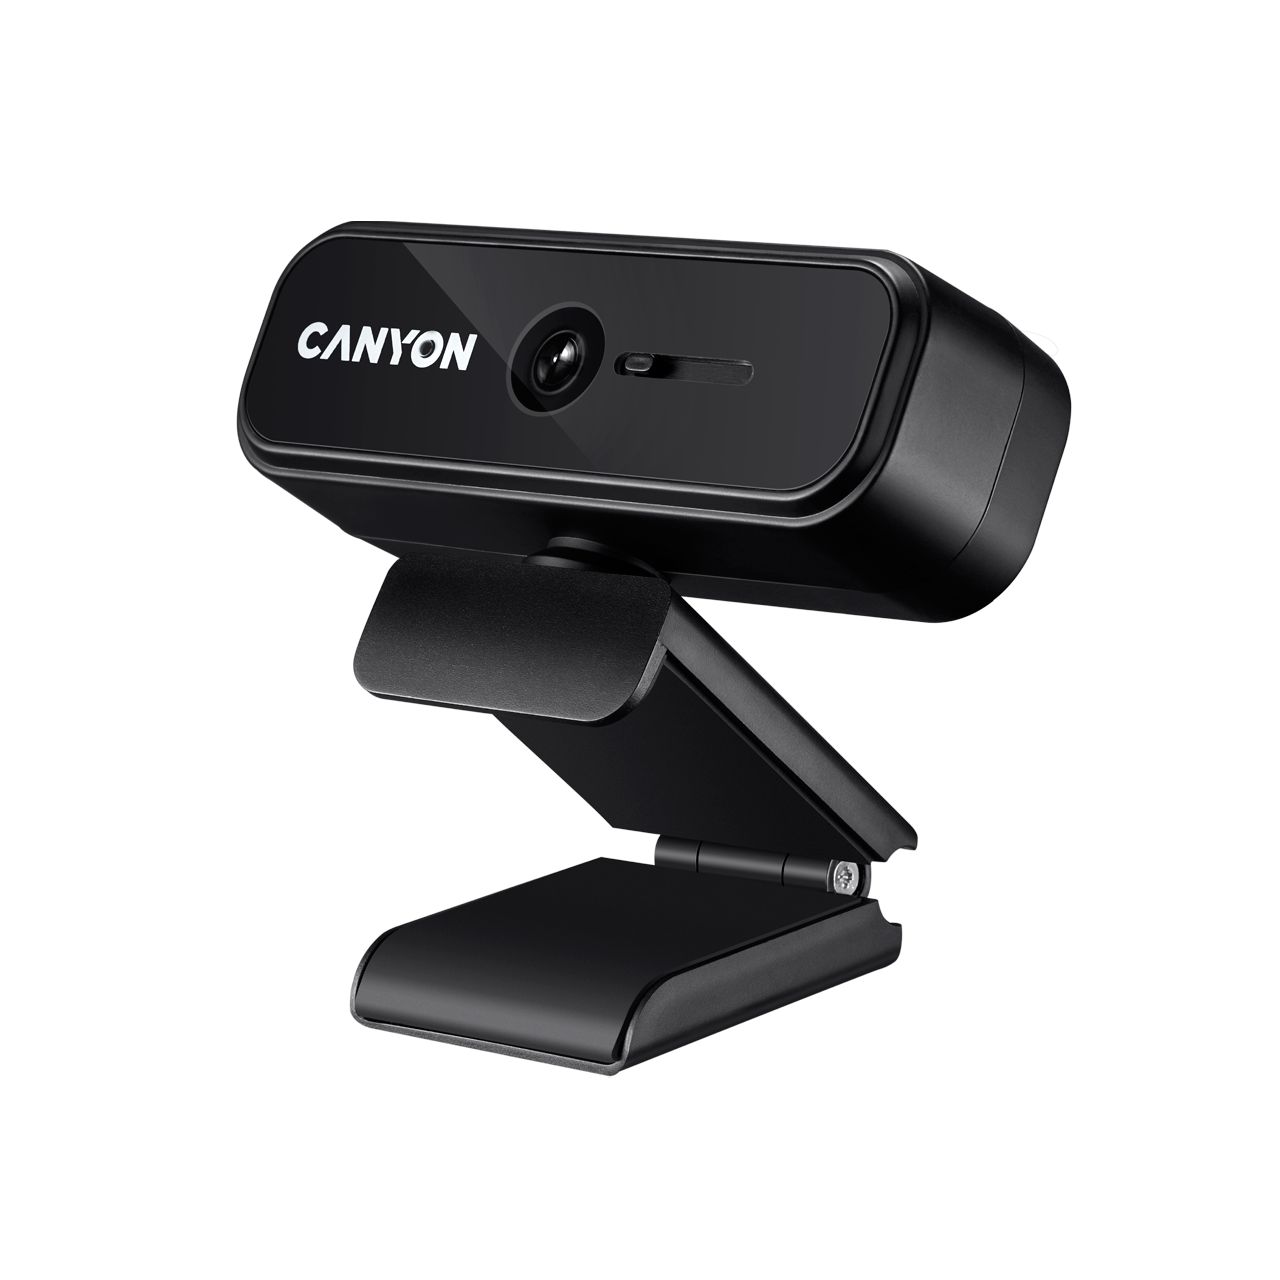 CANYON C2 720P HD 1.0Mega fixed focus webcam with USB2.0. connector, 360° rotary view scope, 1.0Mega pixels, built in MIC, Resolution 1280*720(1920*1080 by interpolation), viewing angle 46°, cable length 1.5m, 90*60*55mm, 0.104kg, Black_3